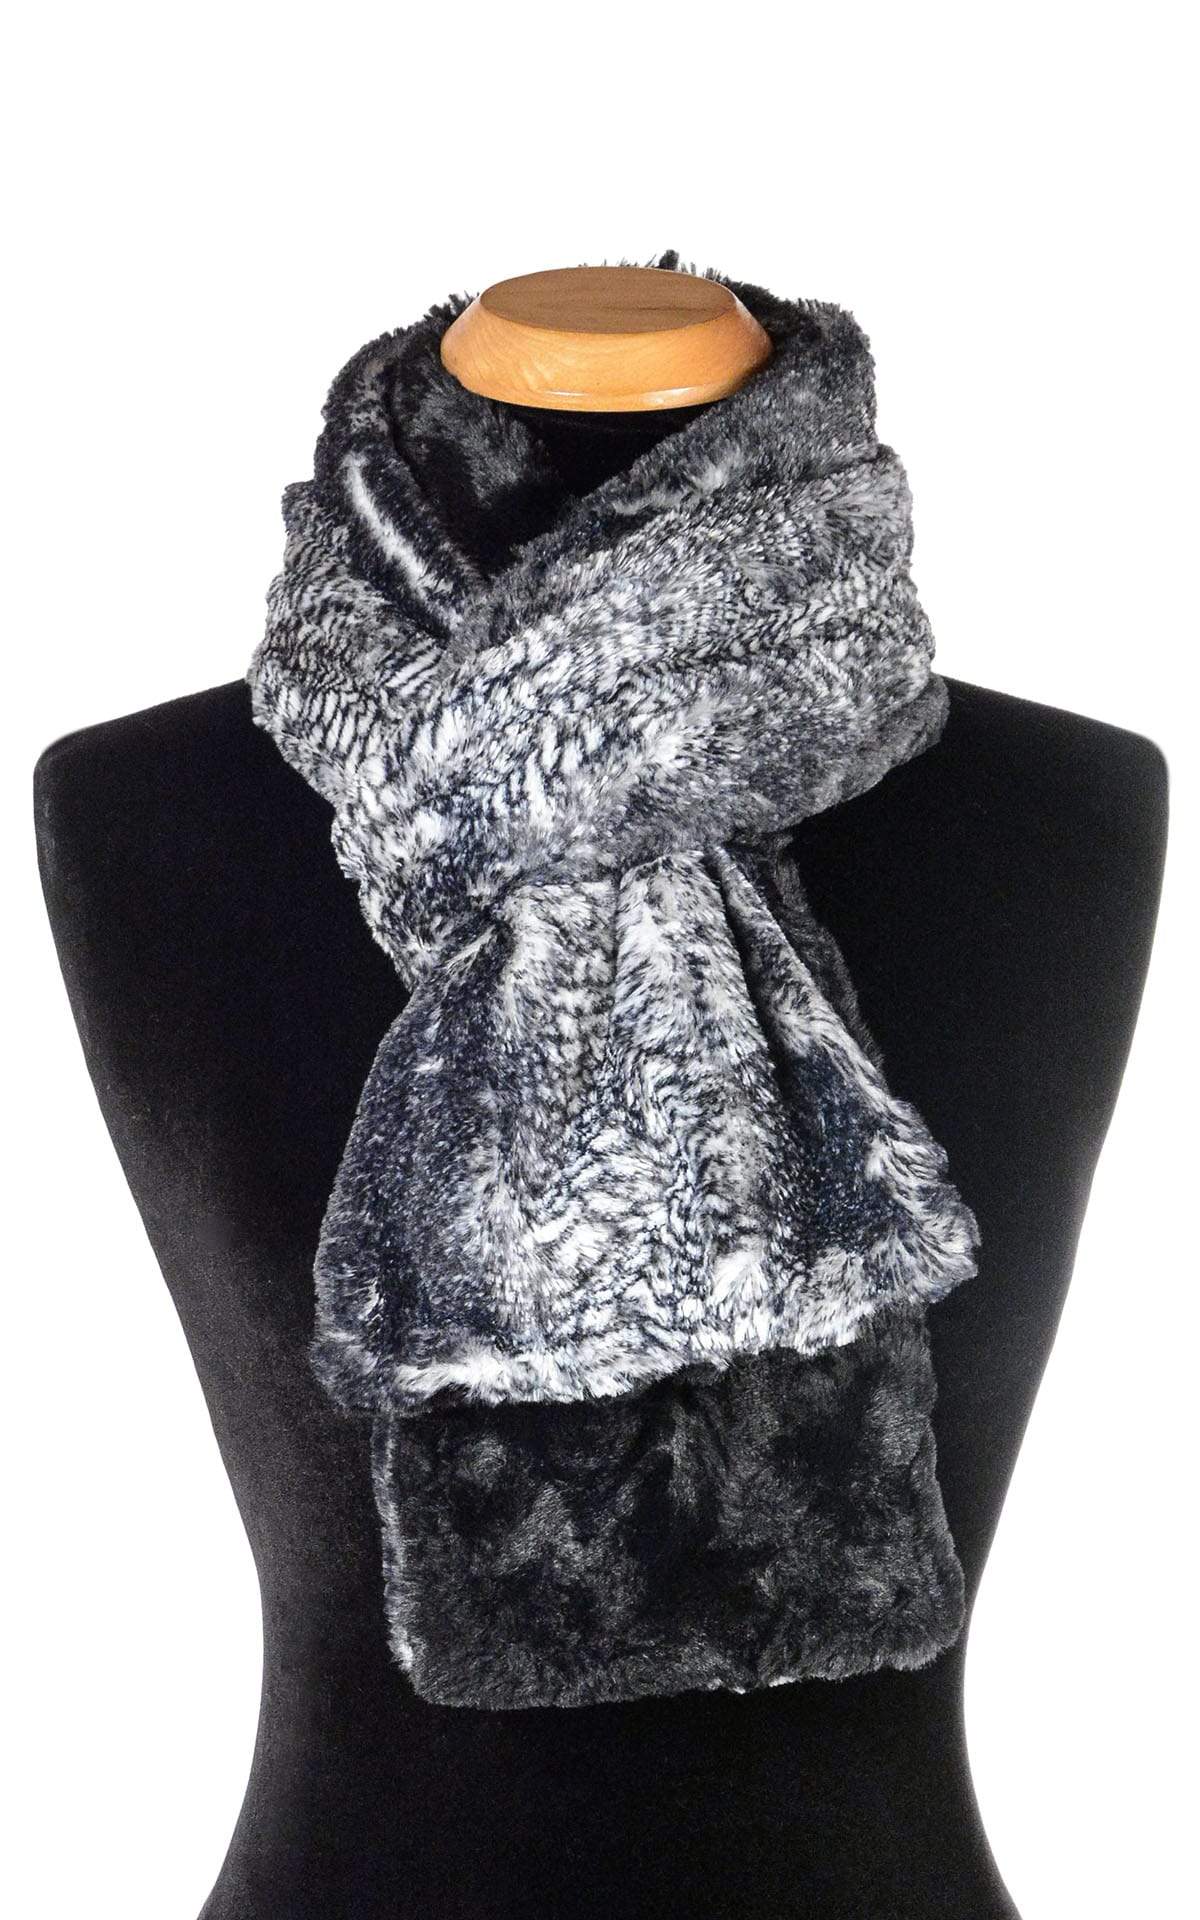 Women’s Product shot on mannequin of two-tone Classic Scarf Black Mamba animal snake print  with Cuddly Black Faux Fur | Handmade by Pandemonium Millinery Seattle, WA USA